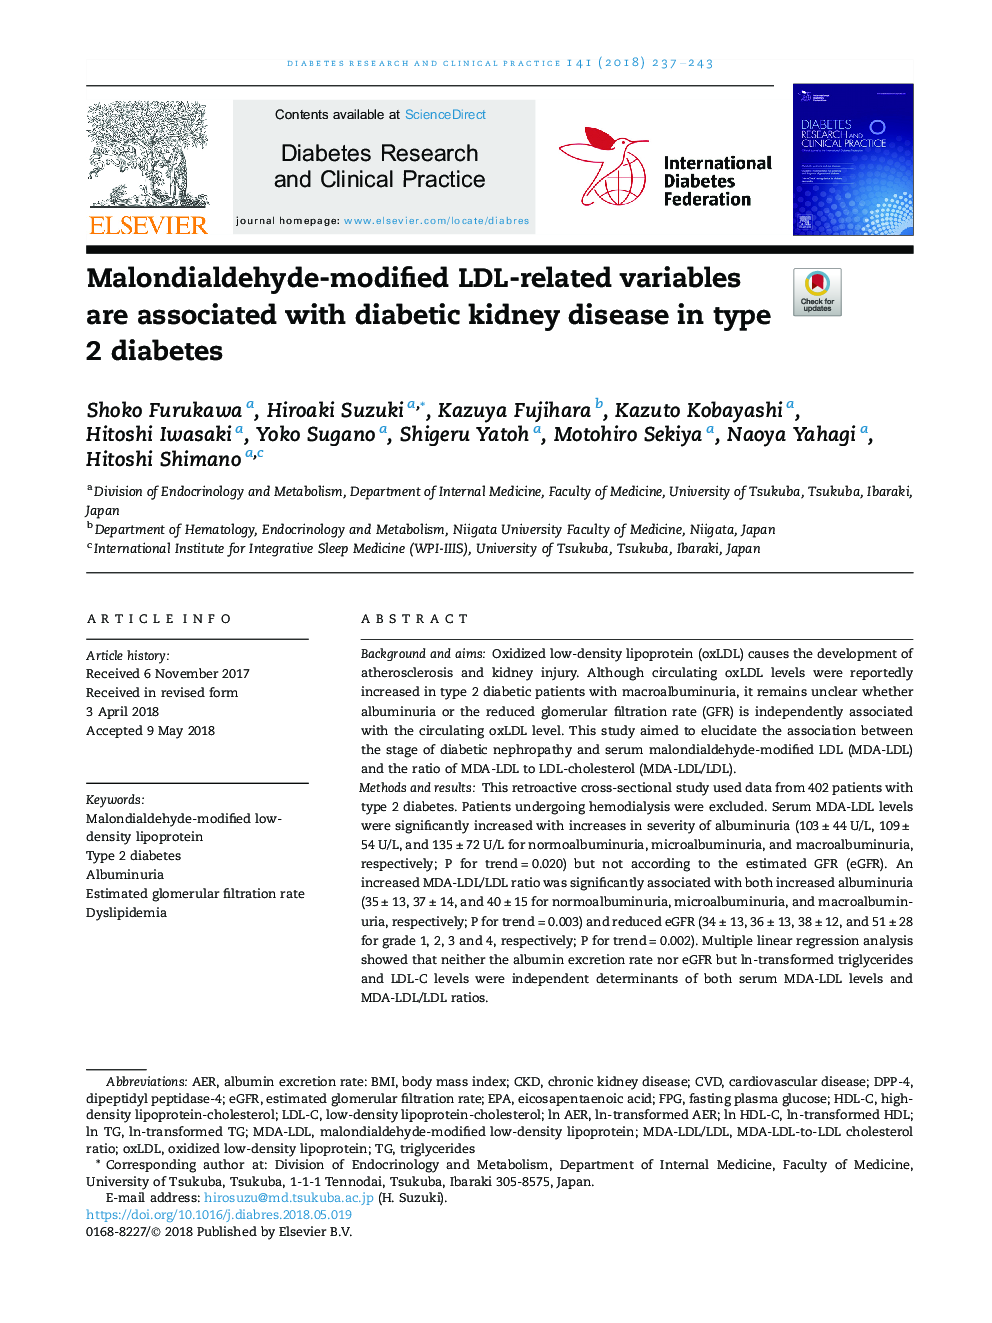 Malondialdehyde-modified LDL-related variables are associated with diabetic kidney disease in type 2 diabetes